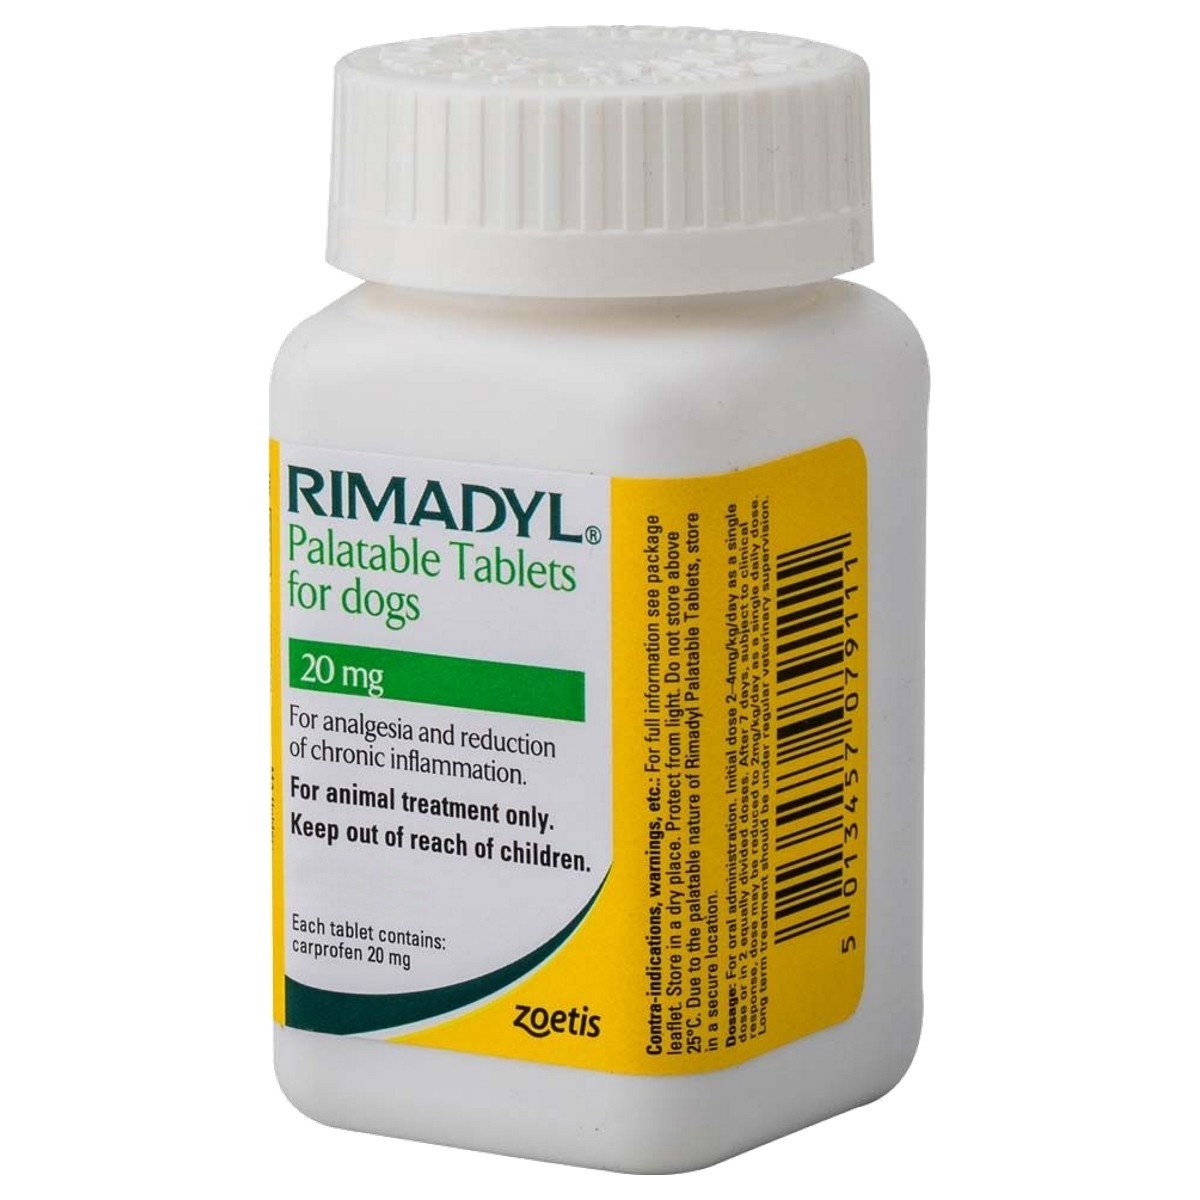 Rimadyl 20mg Palatable Tablets - From £0.30